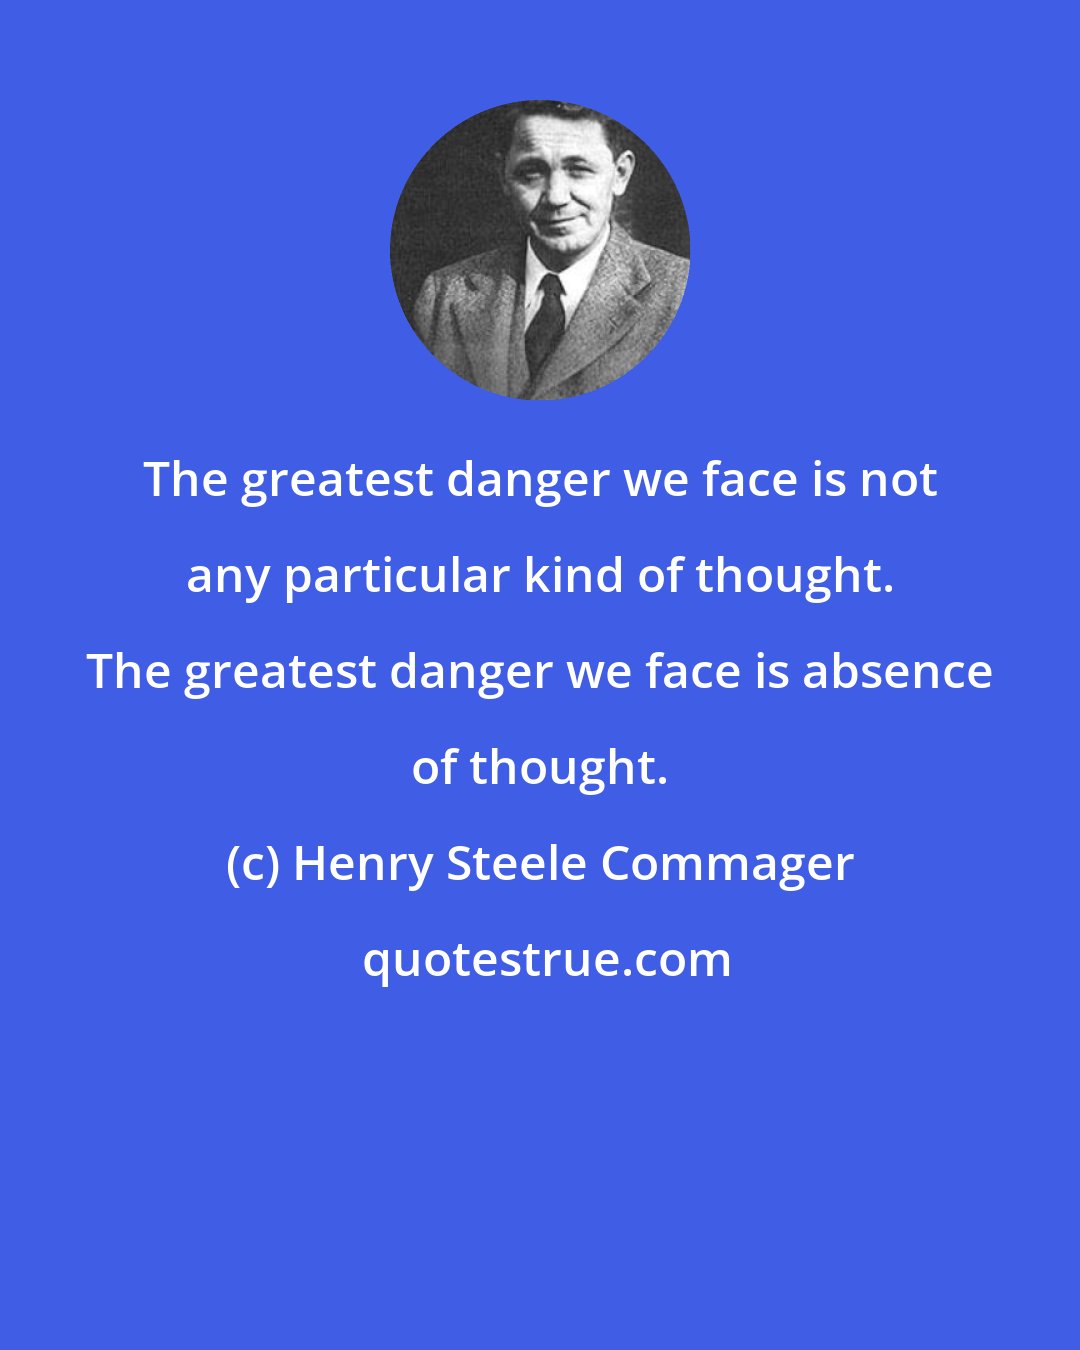 Henry Steele Commager: The greatest danger we face is not any particular kind of thought. The greatest danger we face is absence of thought.